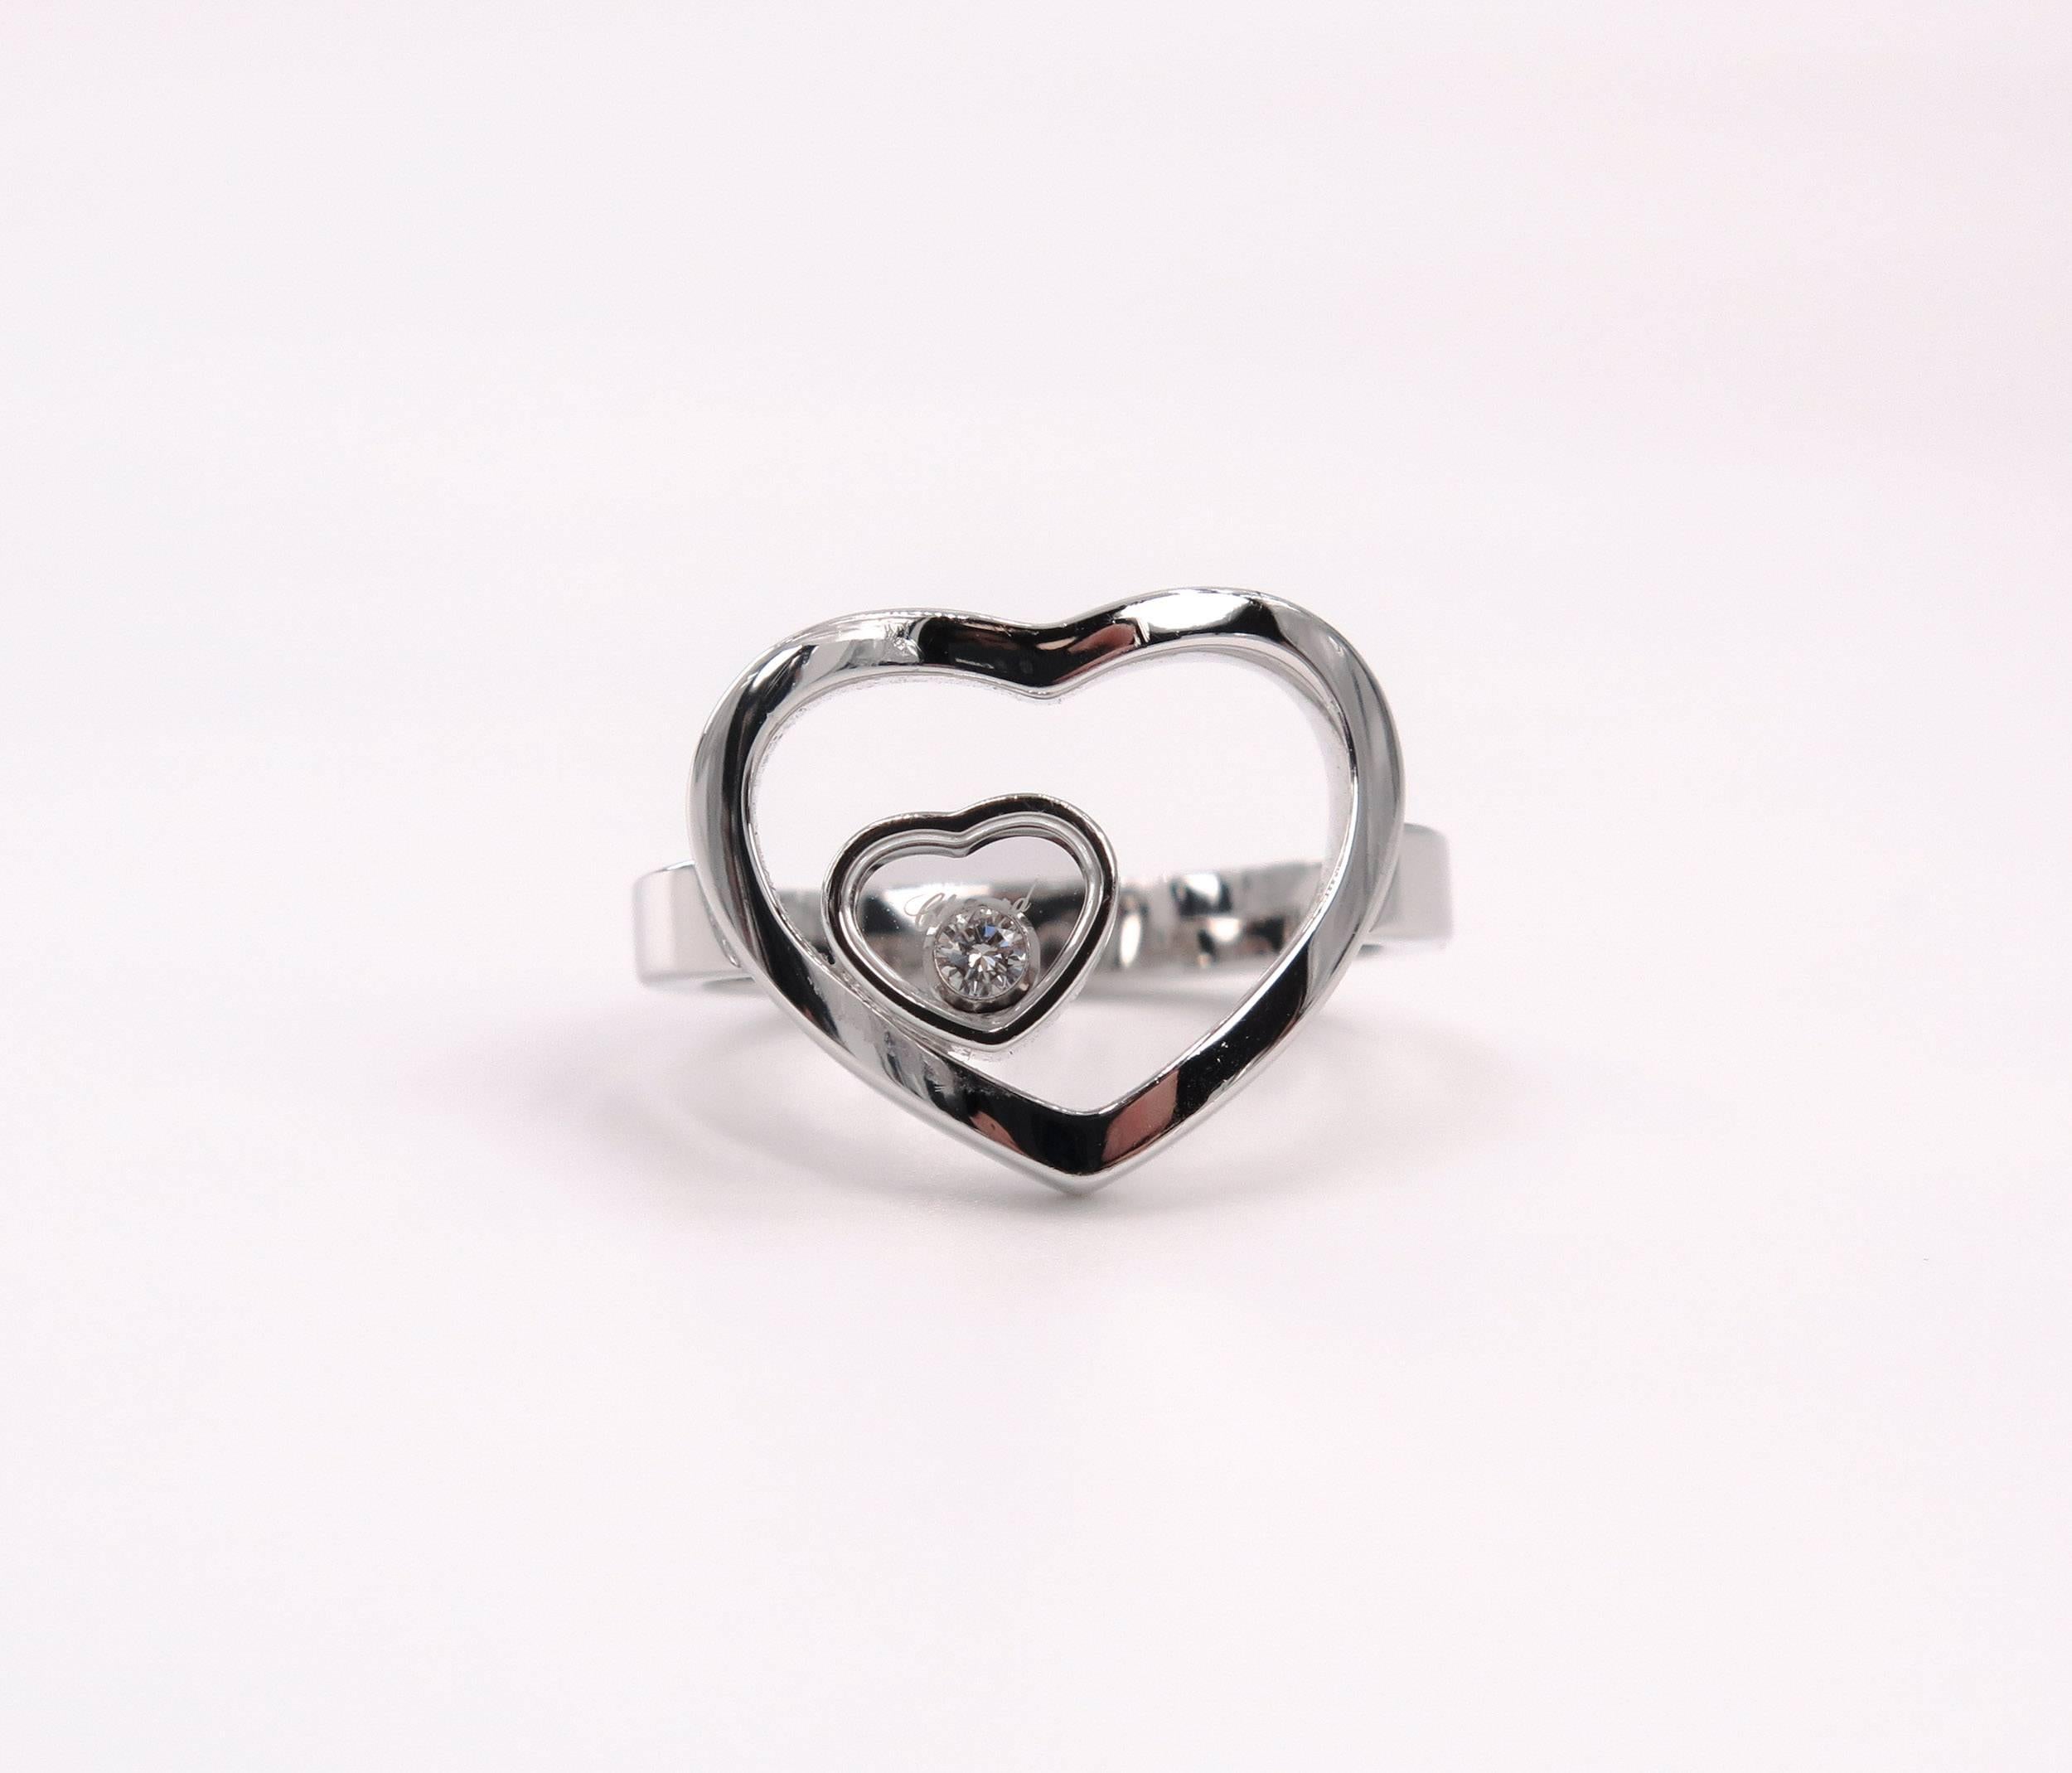 This Chopard ring in 18k white gold is part of the Happy Diamonds collection. Two hearts are delicately combined in a perfect marriage of sparkling harmony. The larger is designed openly to hold the smaller heart encasing a single Chopard moving